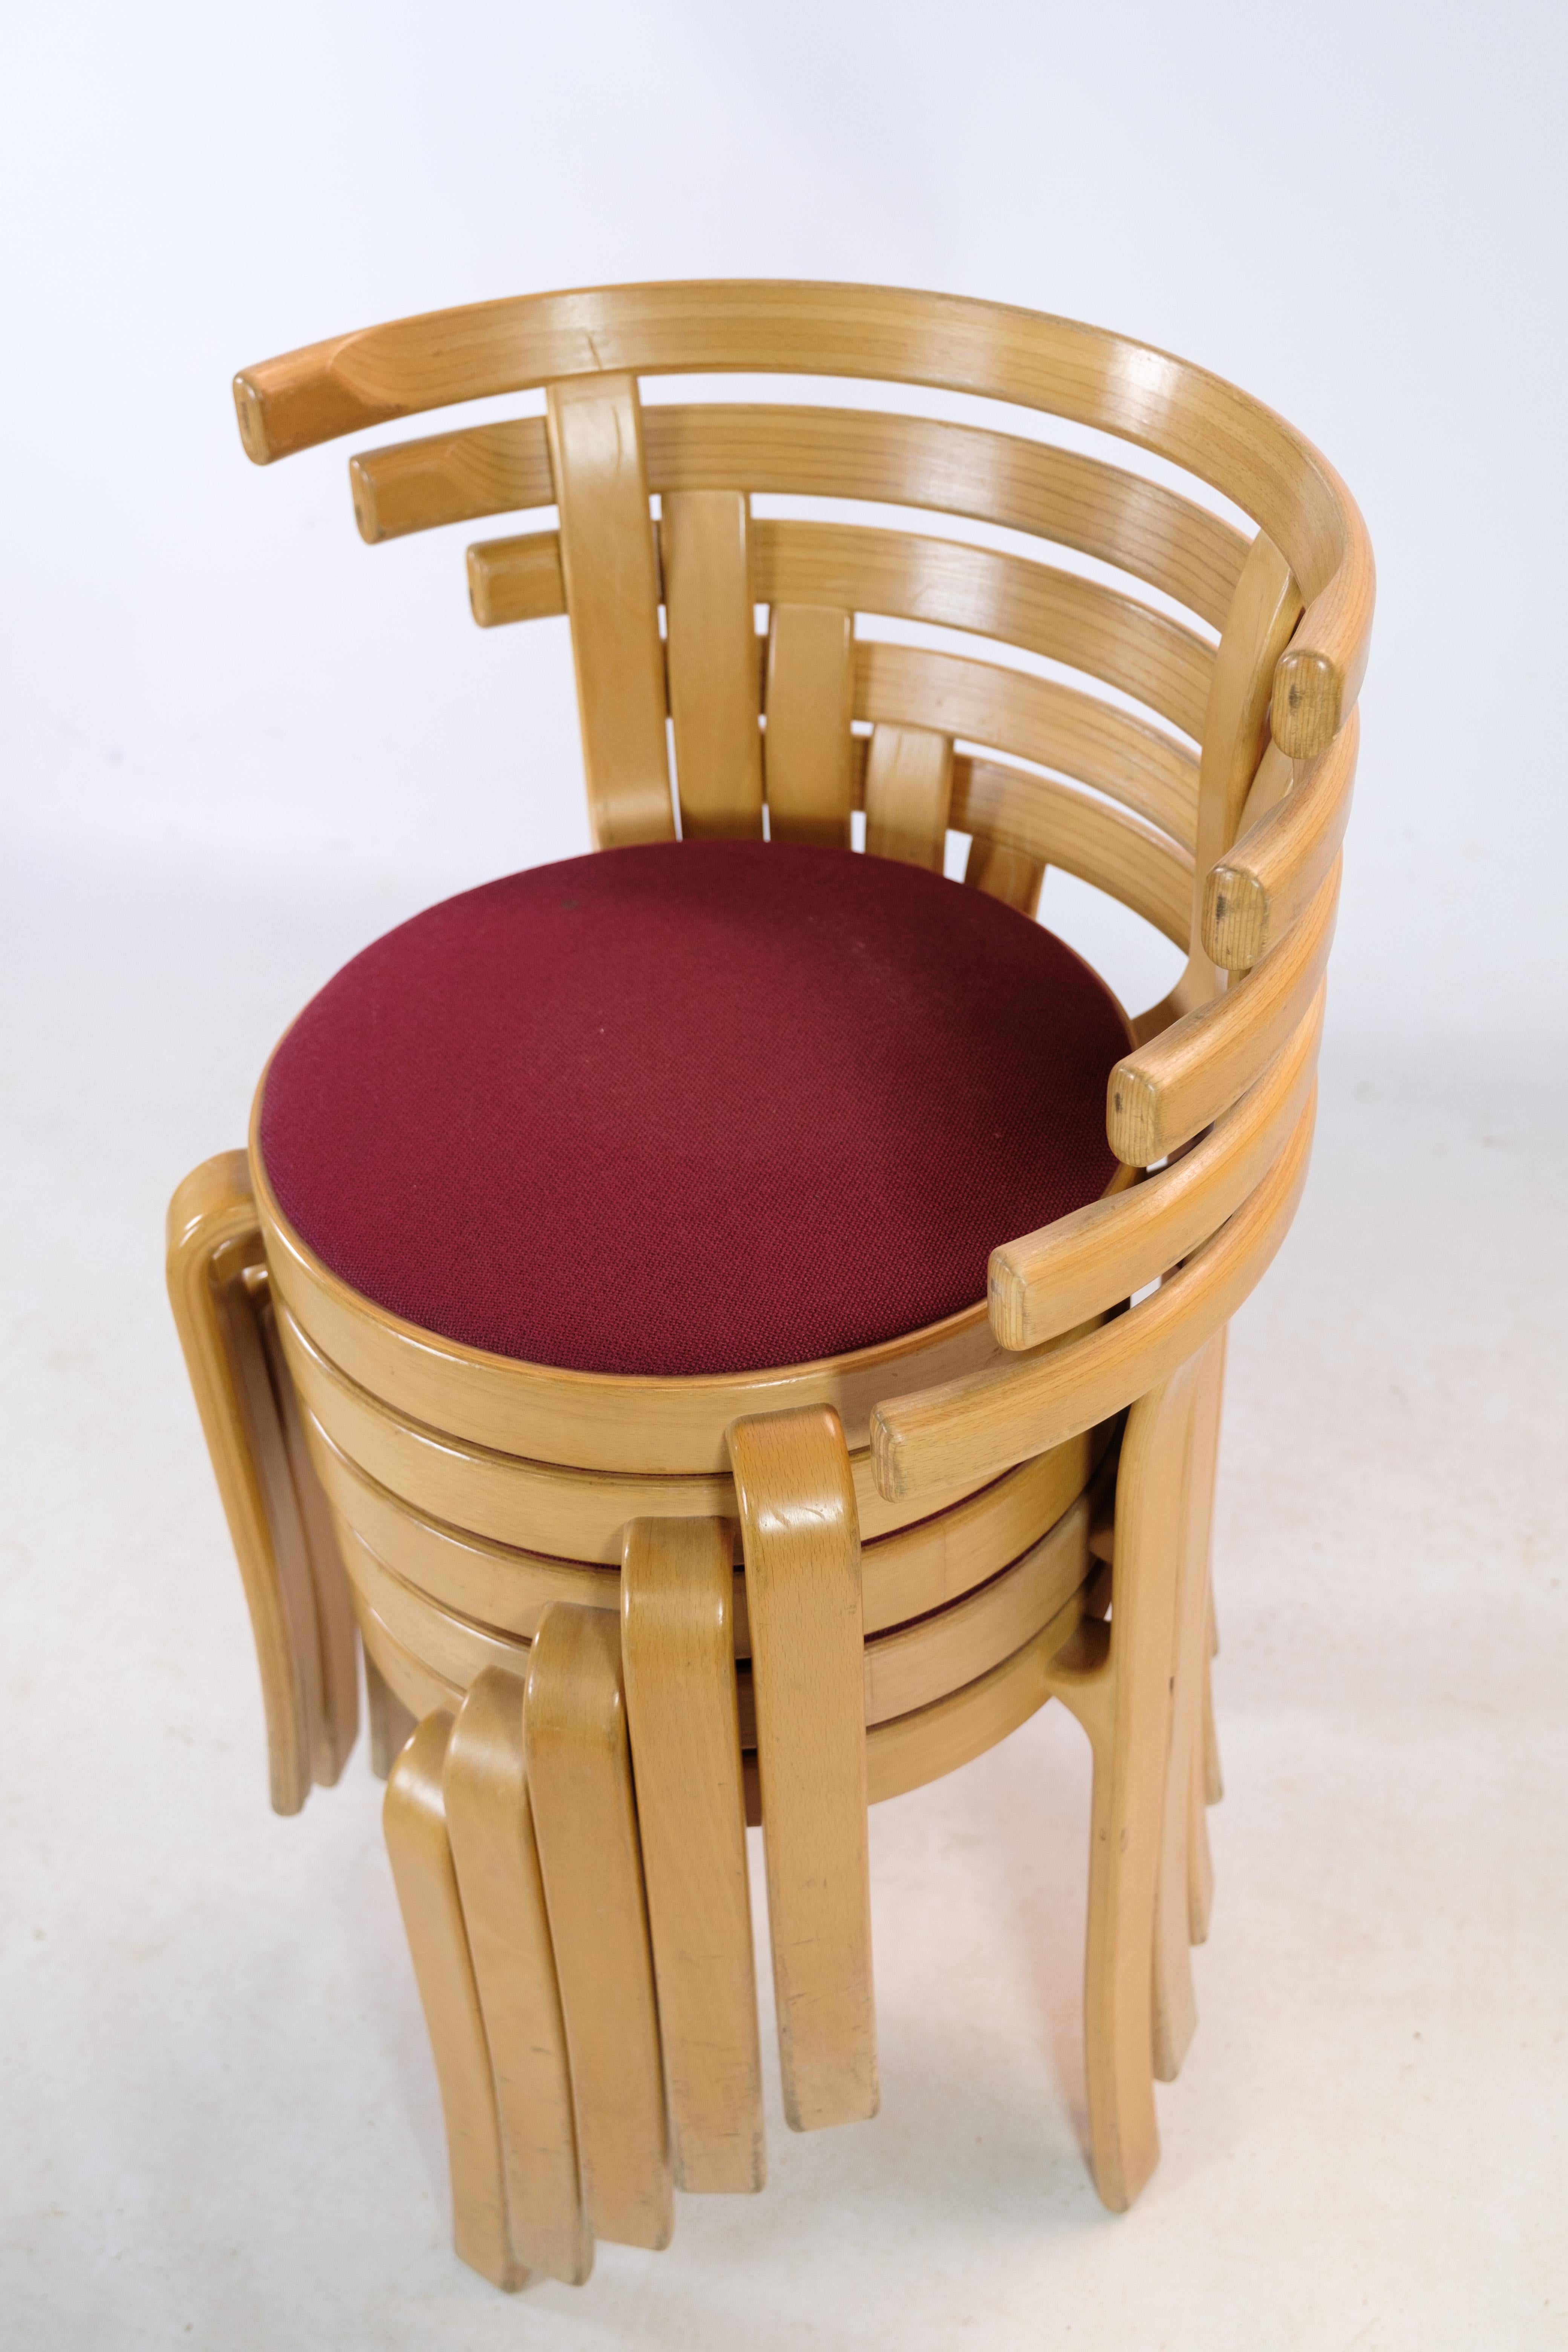 Set of 8 chairs, model 8000 Series, designed by Rud Thygesen & Johnny Sørensen in beech wood with red fabric made by Magnus Olesen. The chairs have been produced by Magnus Olesen since 1981
Measurements in cm: H:70 W:54 D:47 SH:45